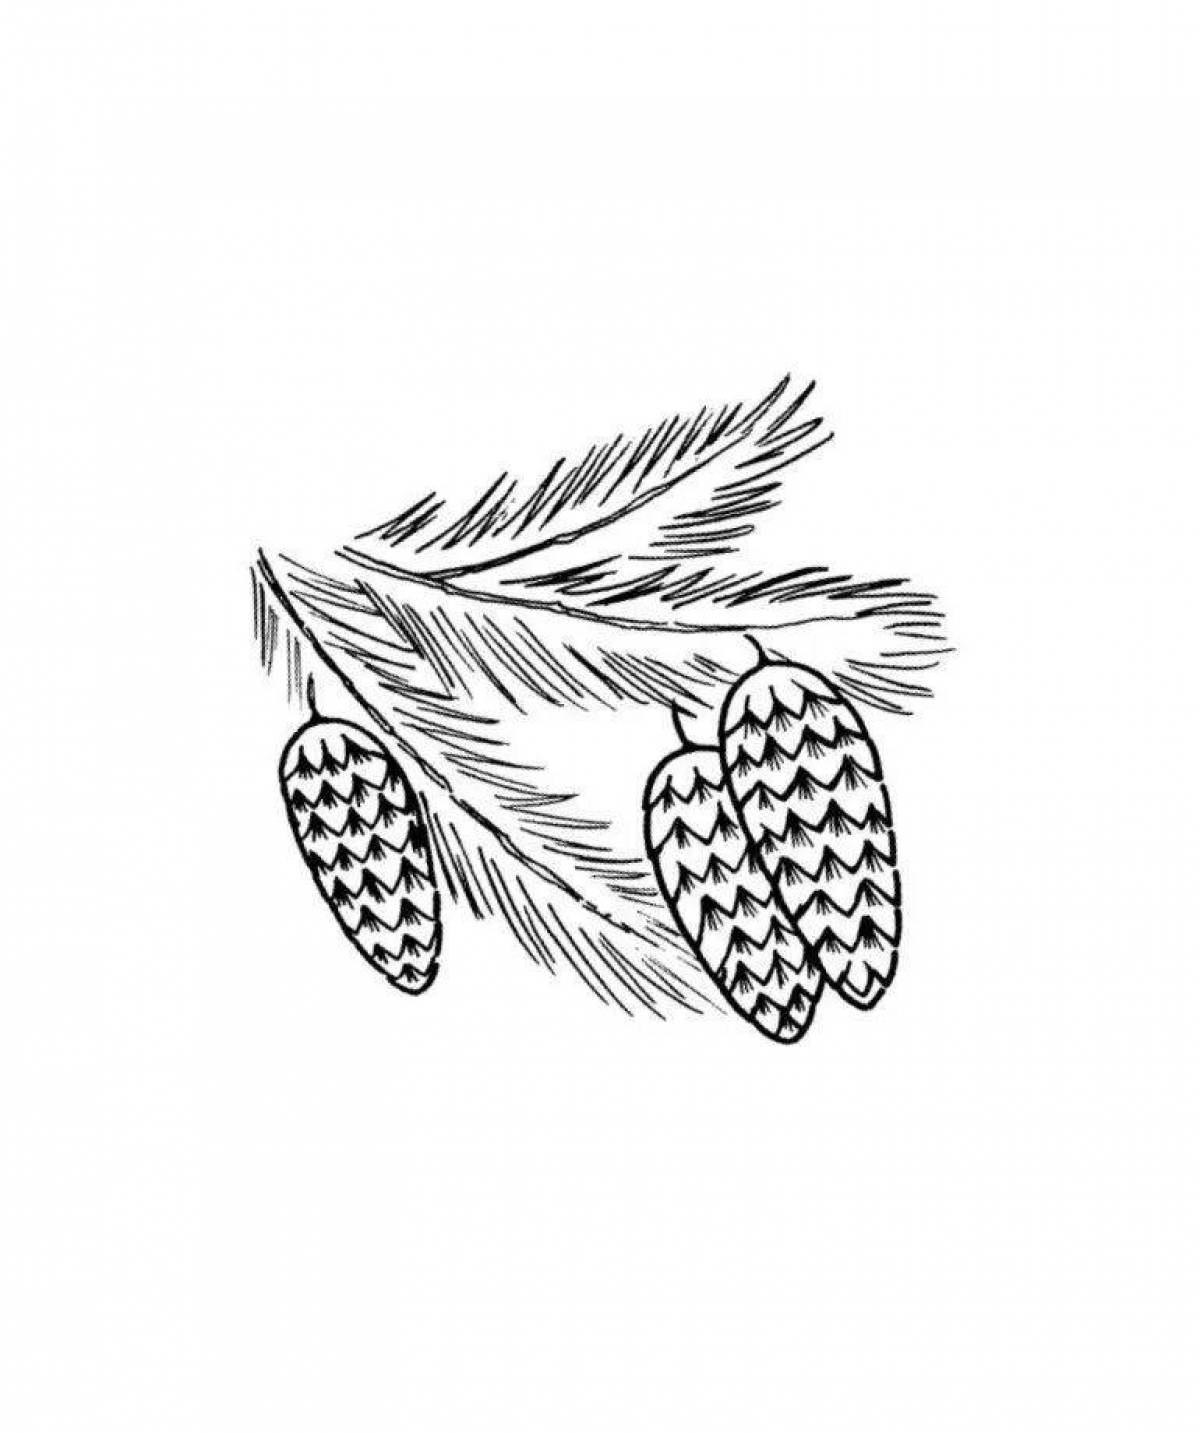 Coloring page delightful sprig of spruce